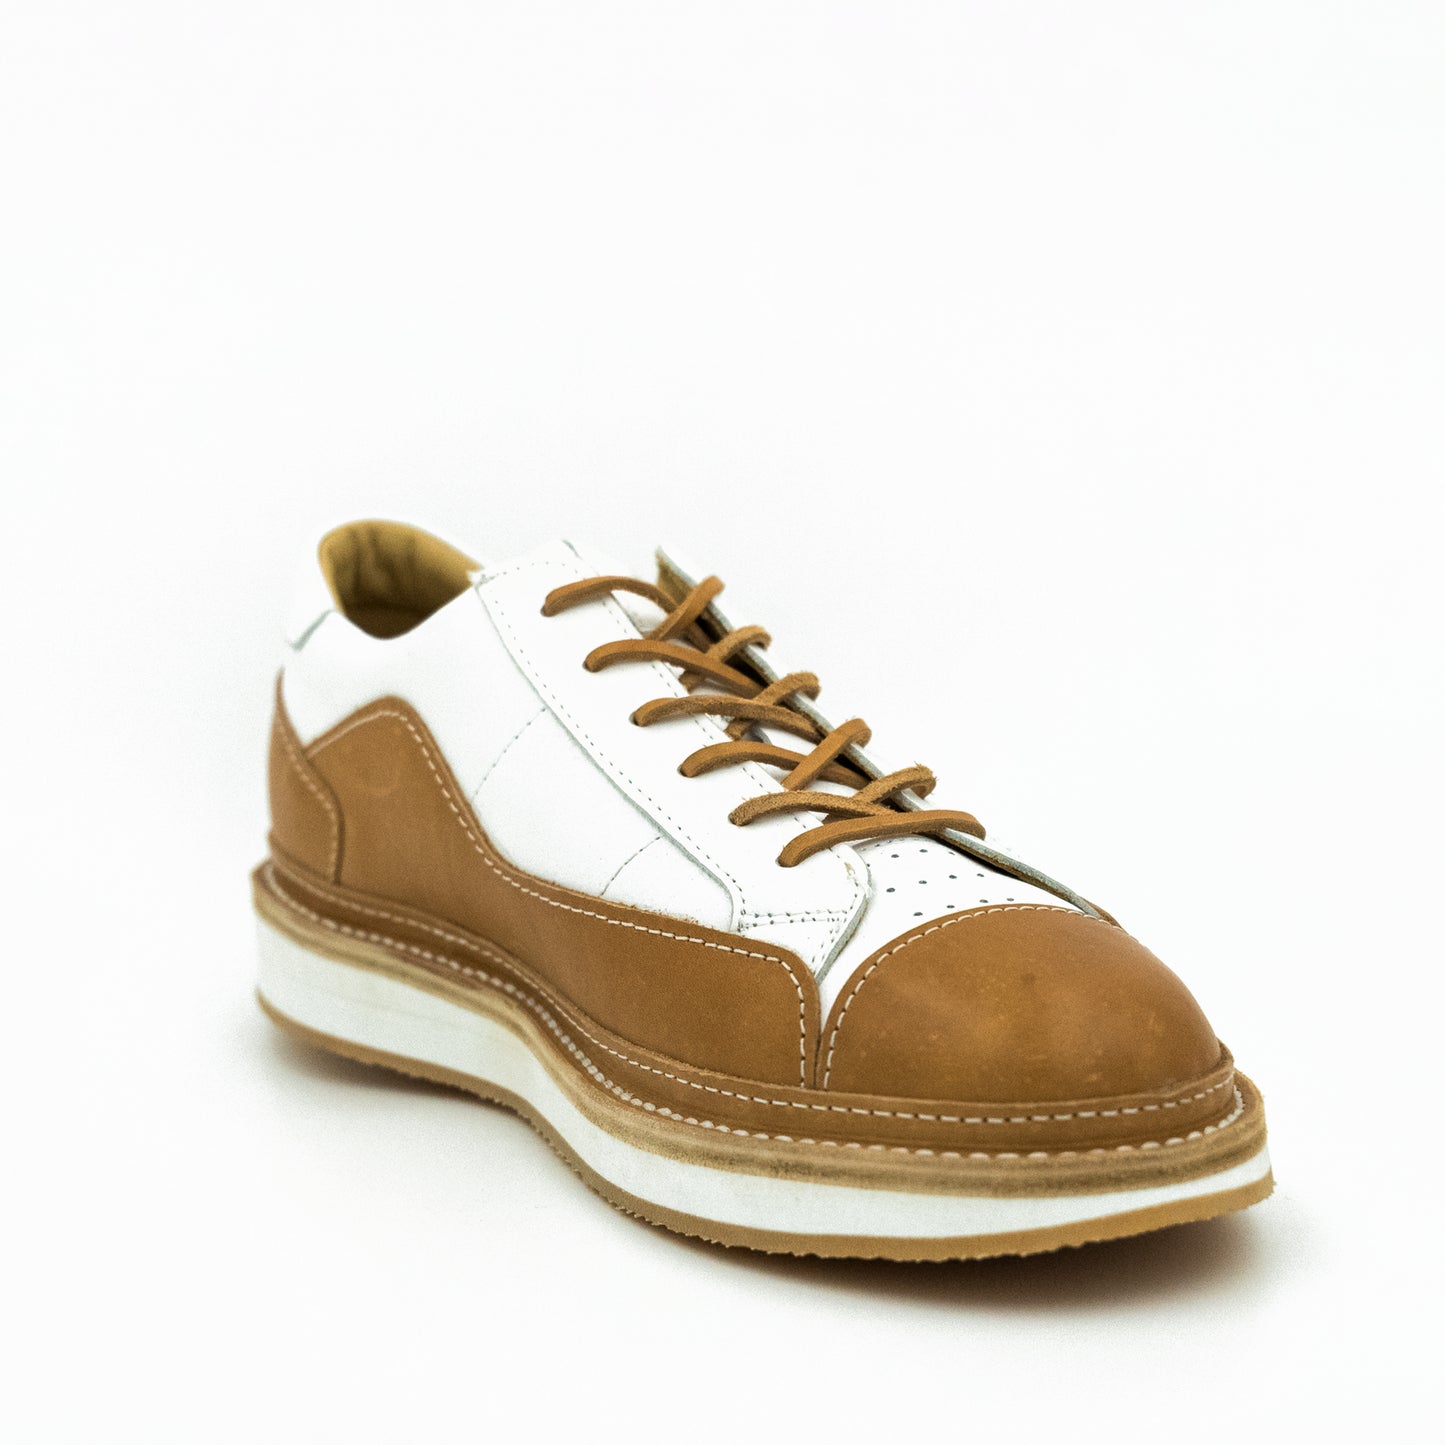 "Remake Greats Royale Low White" [Re:wert]